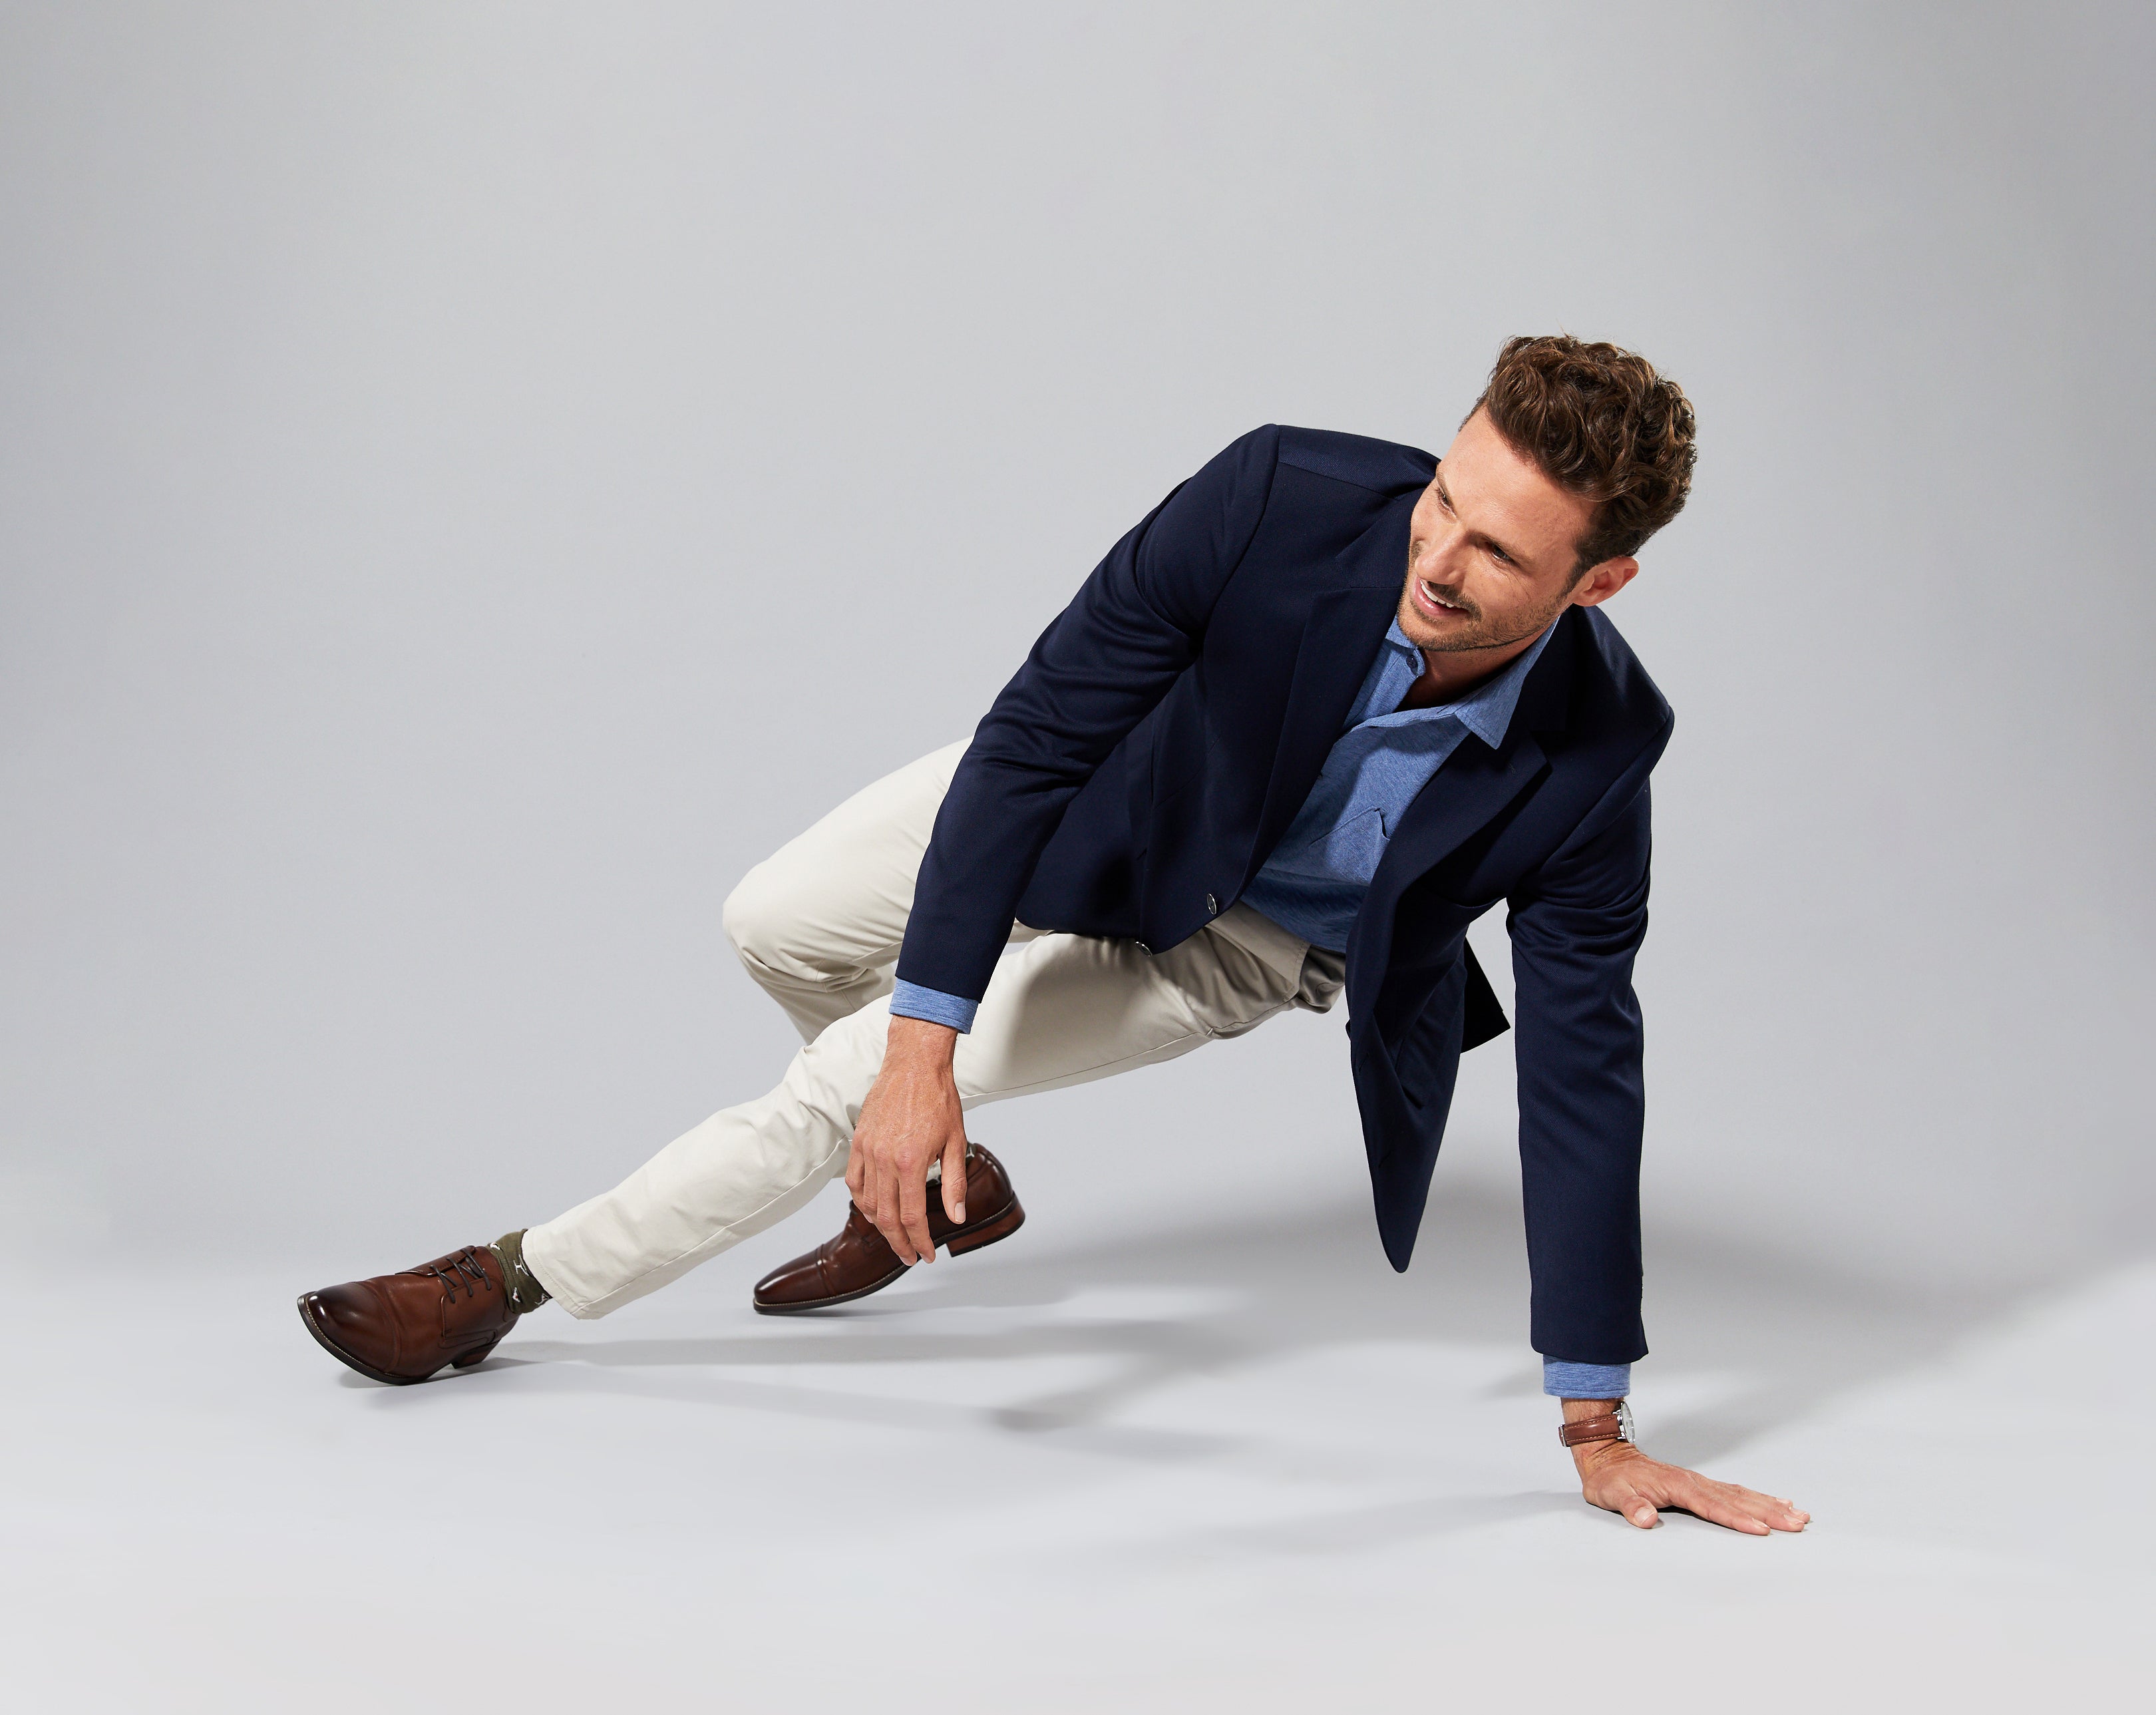 Men's Chinos for the Athleisure Look: Combining Comfort and Style